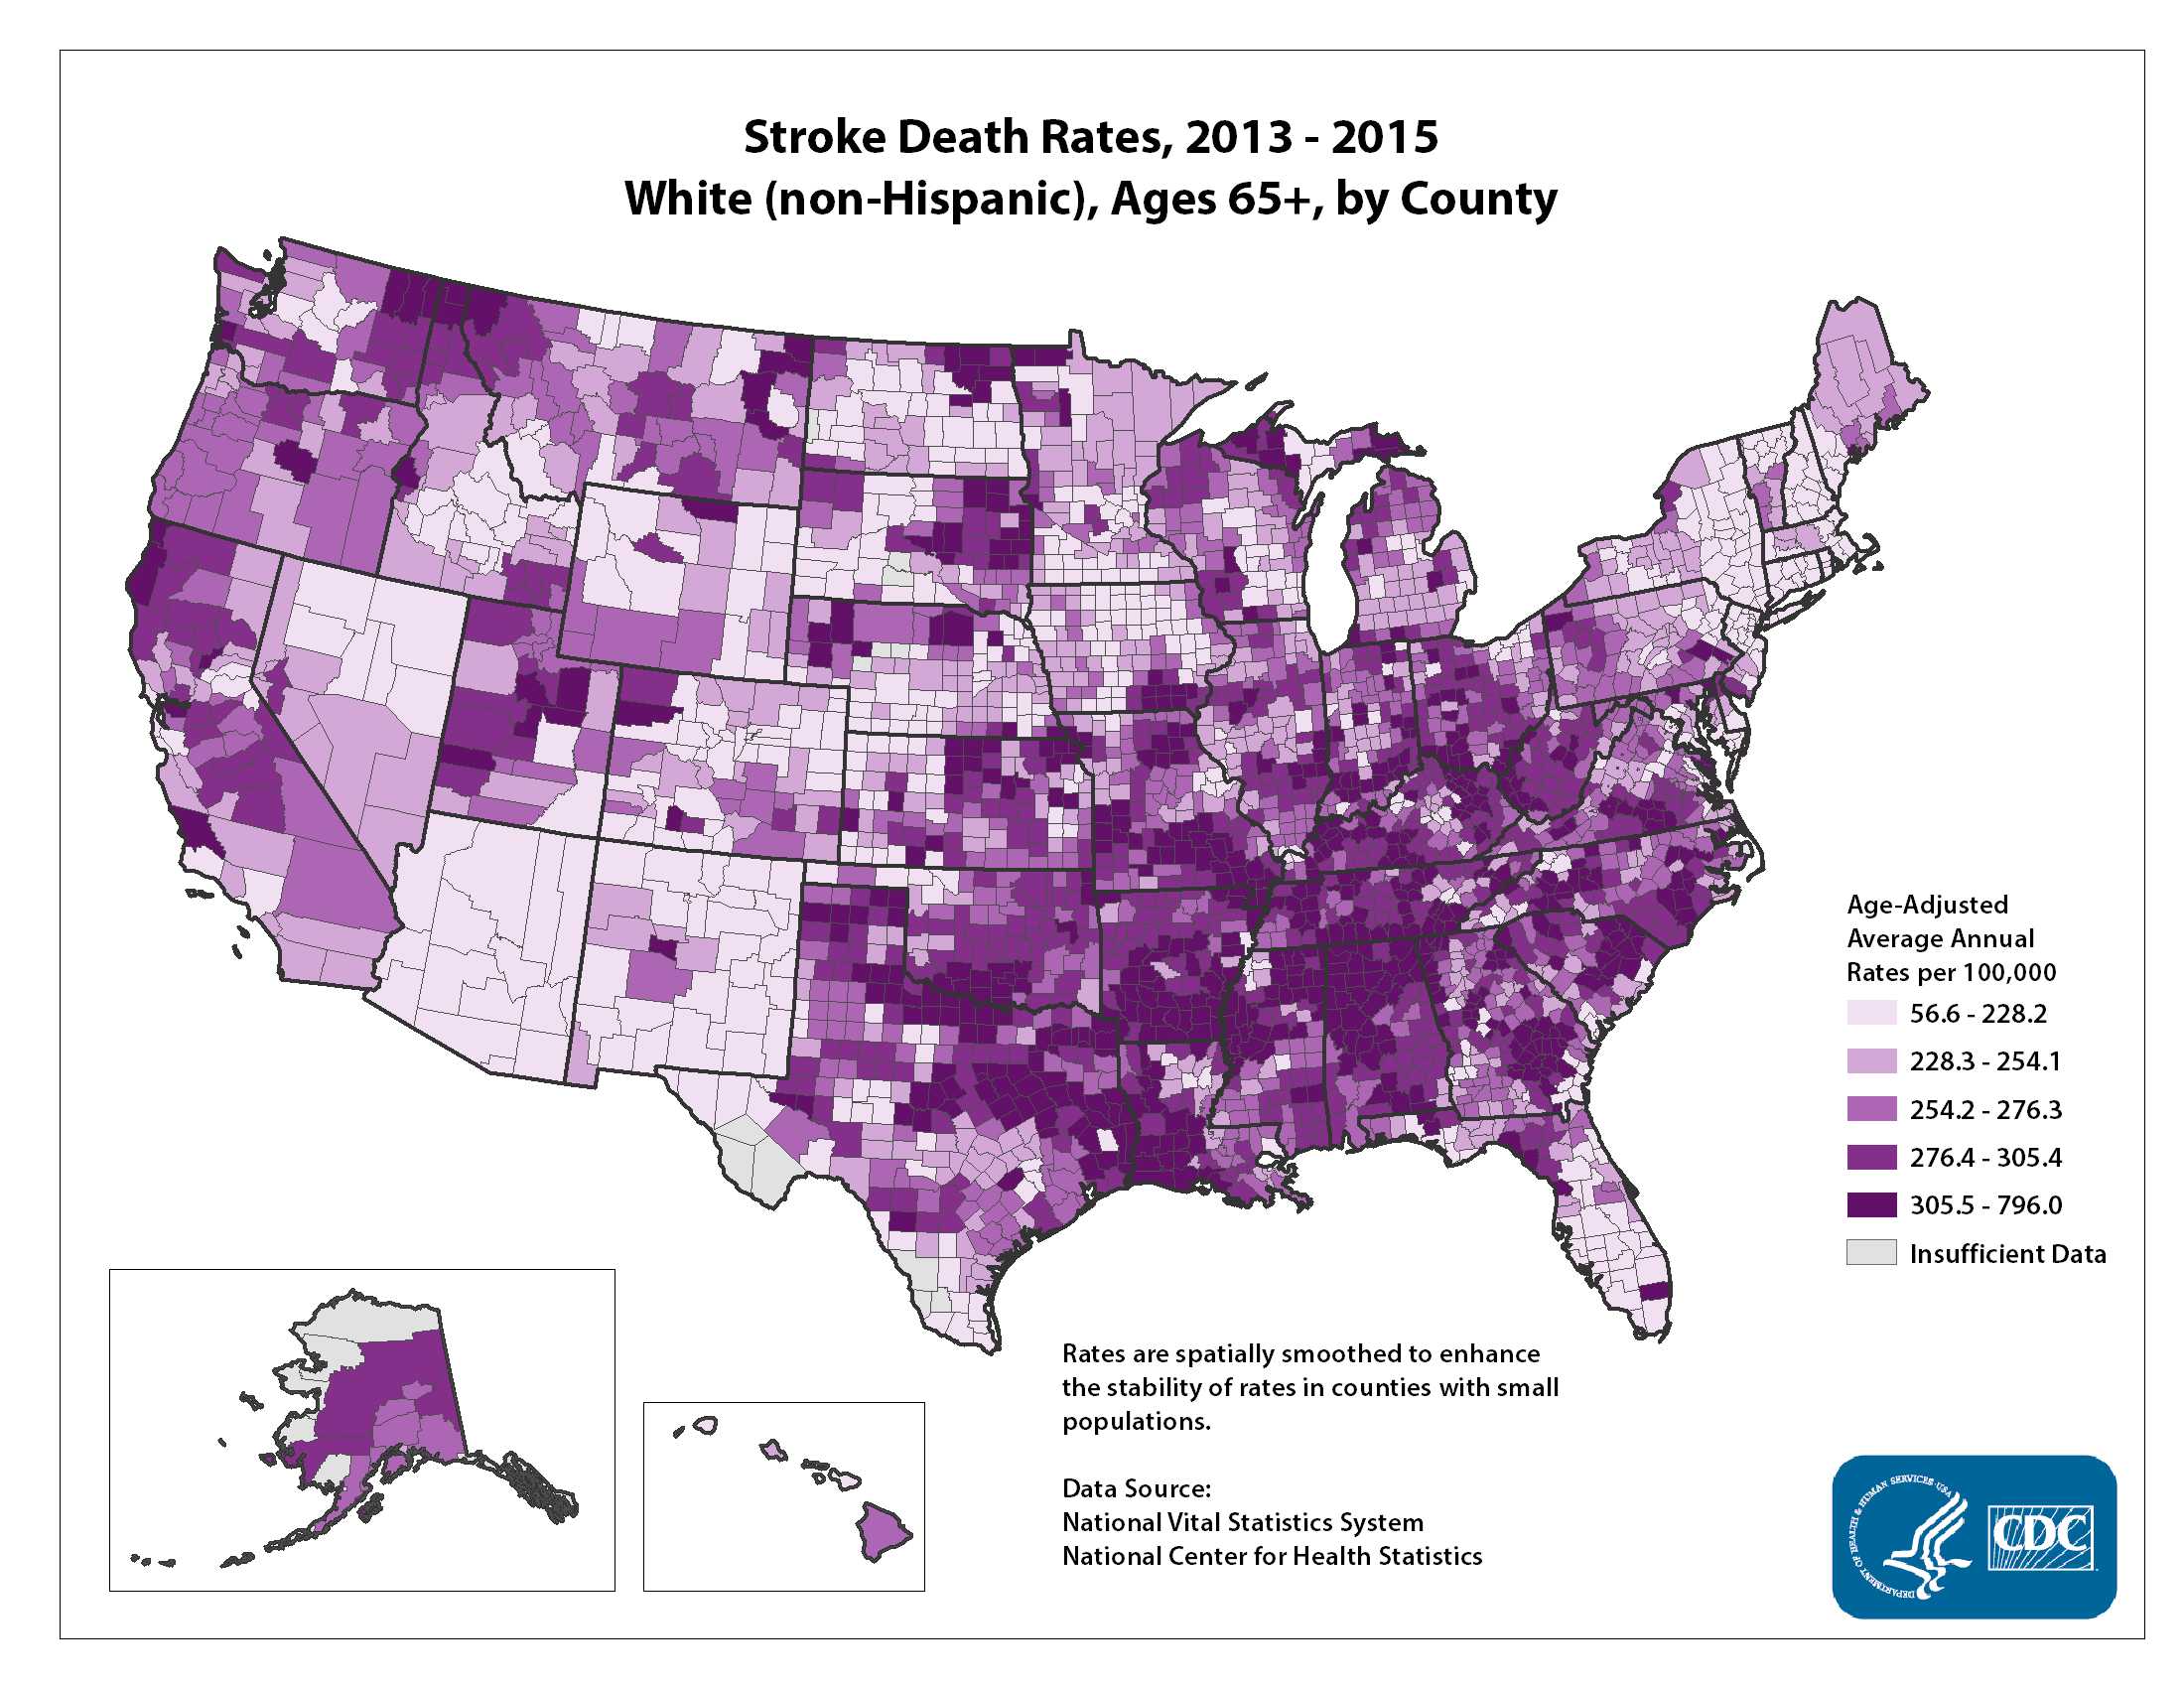 Stroke Death Rates for 2012 through 2014 for Whites Aged 65 Years and Older by County. The map shows that concentrations of counties with the highest stroke death rates - meaning the top quintile - are located primarily in the Southeast, with heavy concentrations of high-rate counties in Arkansas, West Virginia, and Kentucky. Pockets of high-rate counties also are found in Tennessee, Alabama, Louisiana, Mississippi, Oklahoma, North Dakota, South Dakota, Montana, Ohio, Michigan, northern Idaho, and the coastal plains of North Carolina, South Carolina, and Georgia.